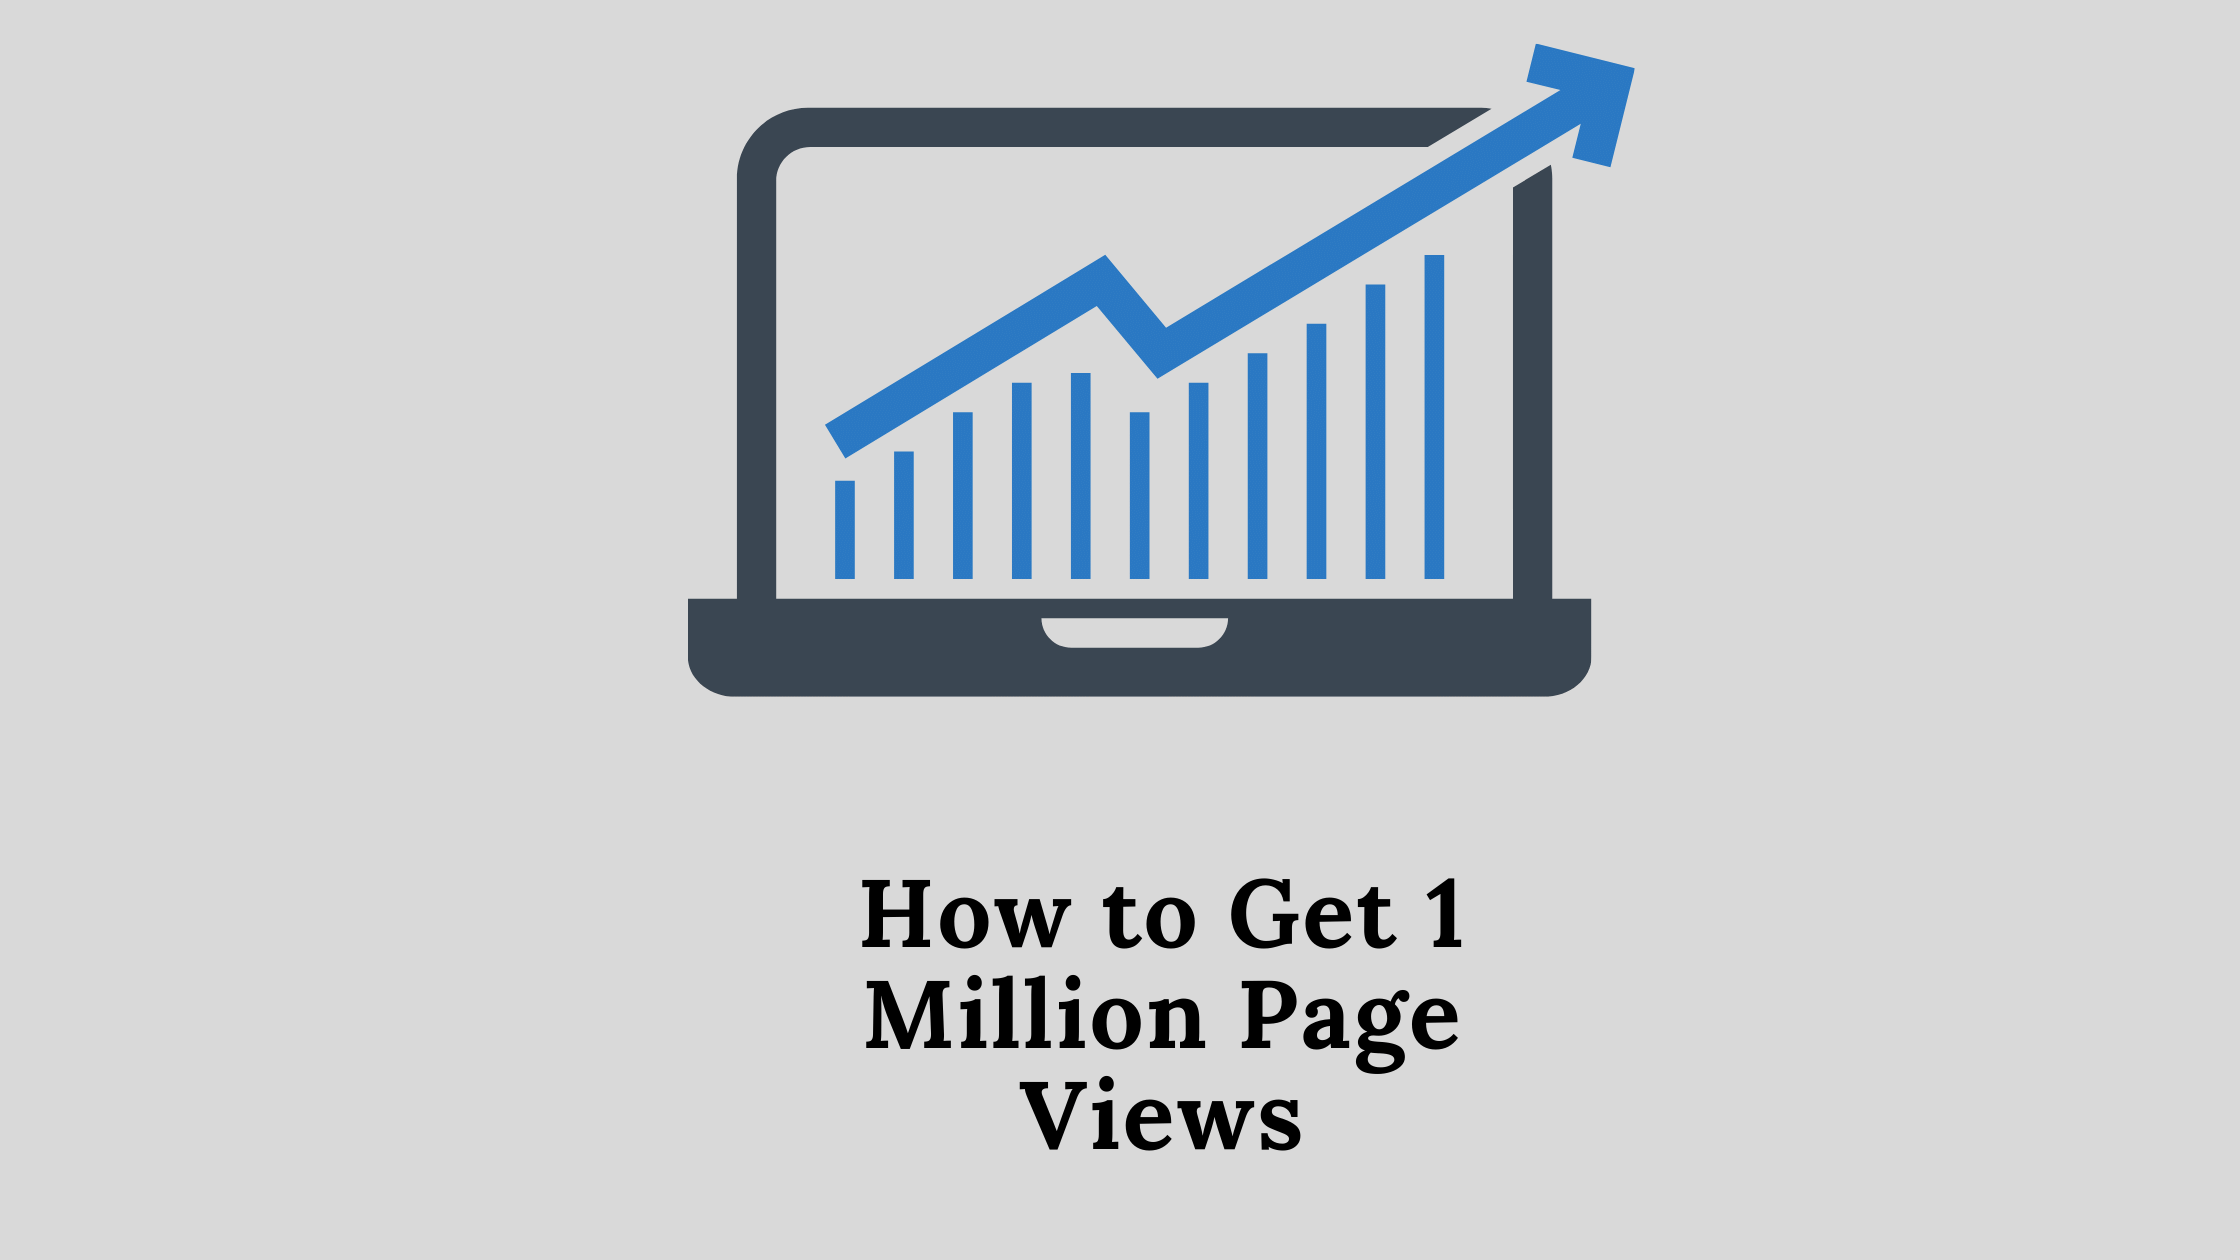 How to Get 1 Million Page Views